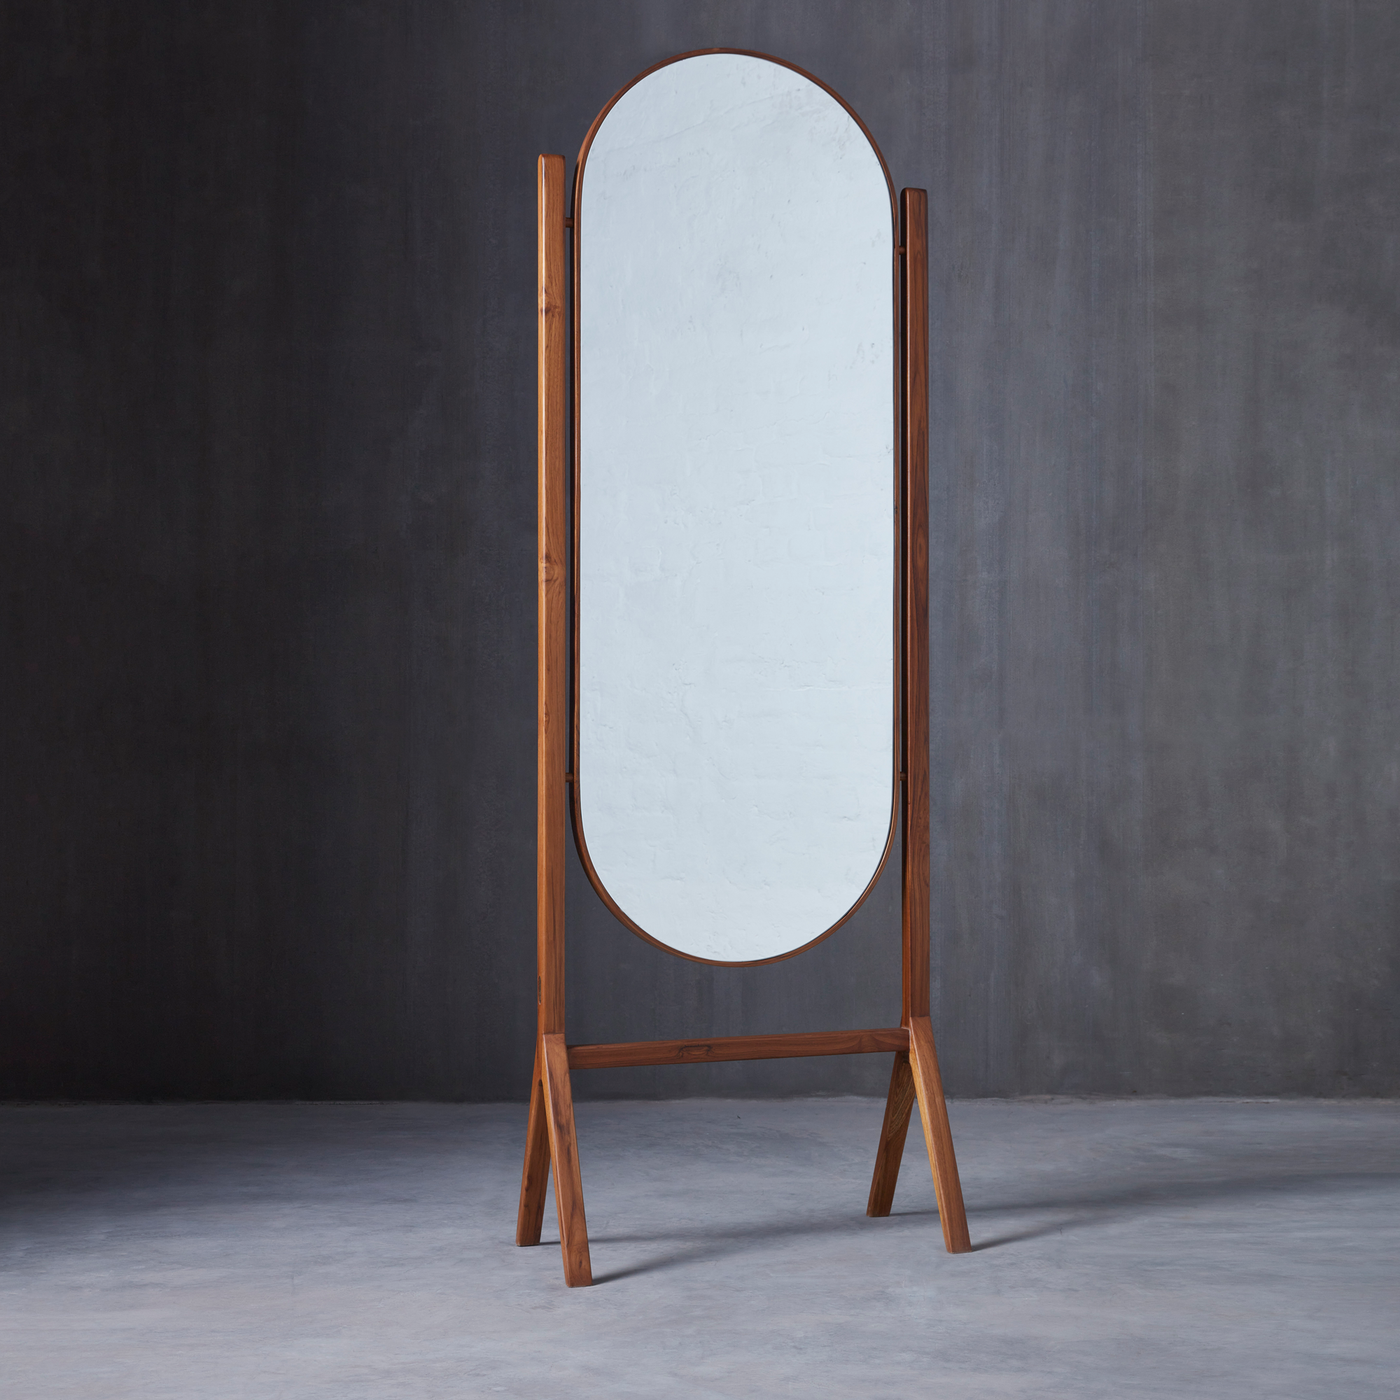 Renga Tall Mirror by Project 810